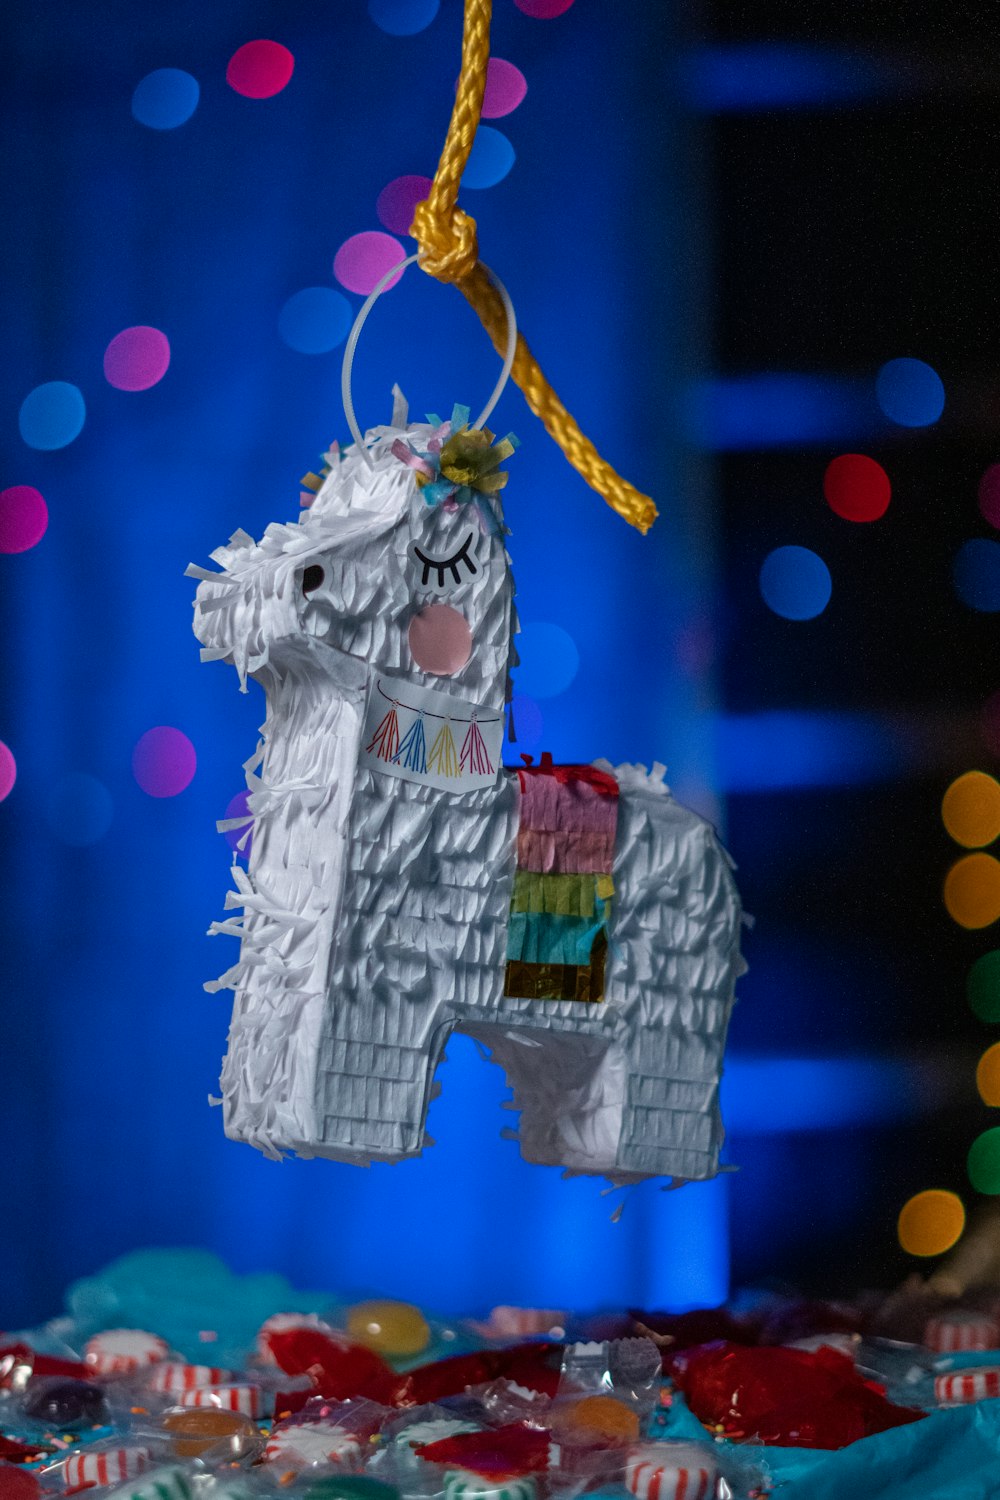 a white horse ornament hanging from a string